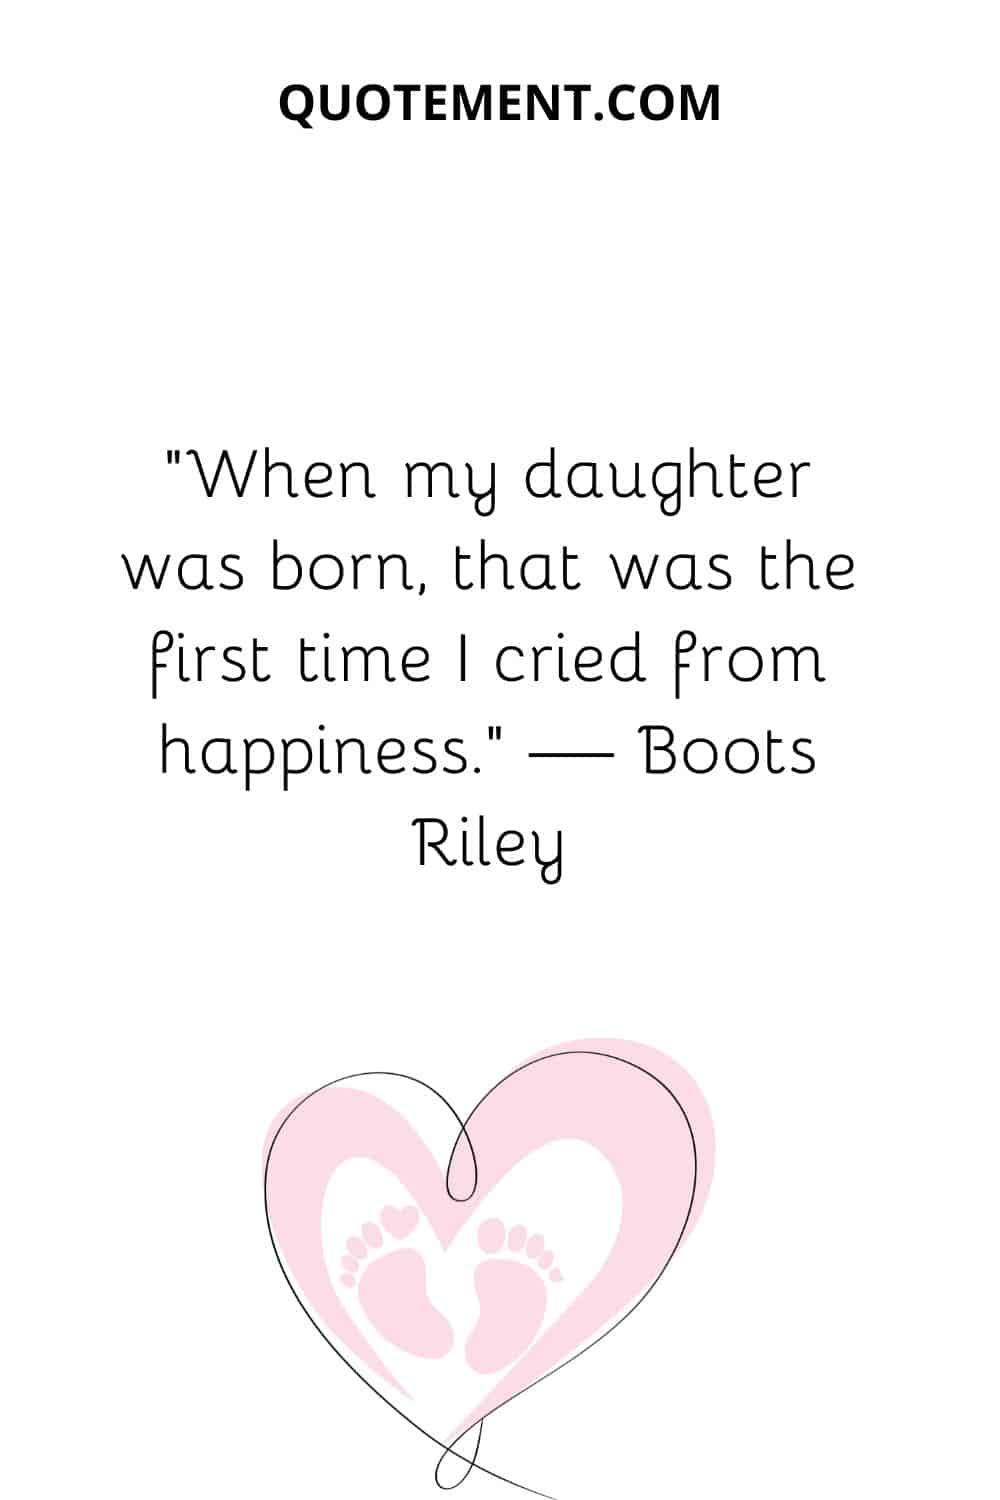 When my daughter was born, that was the first time I cried from happiness